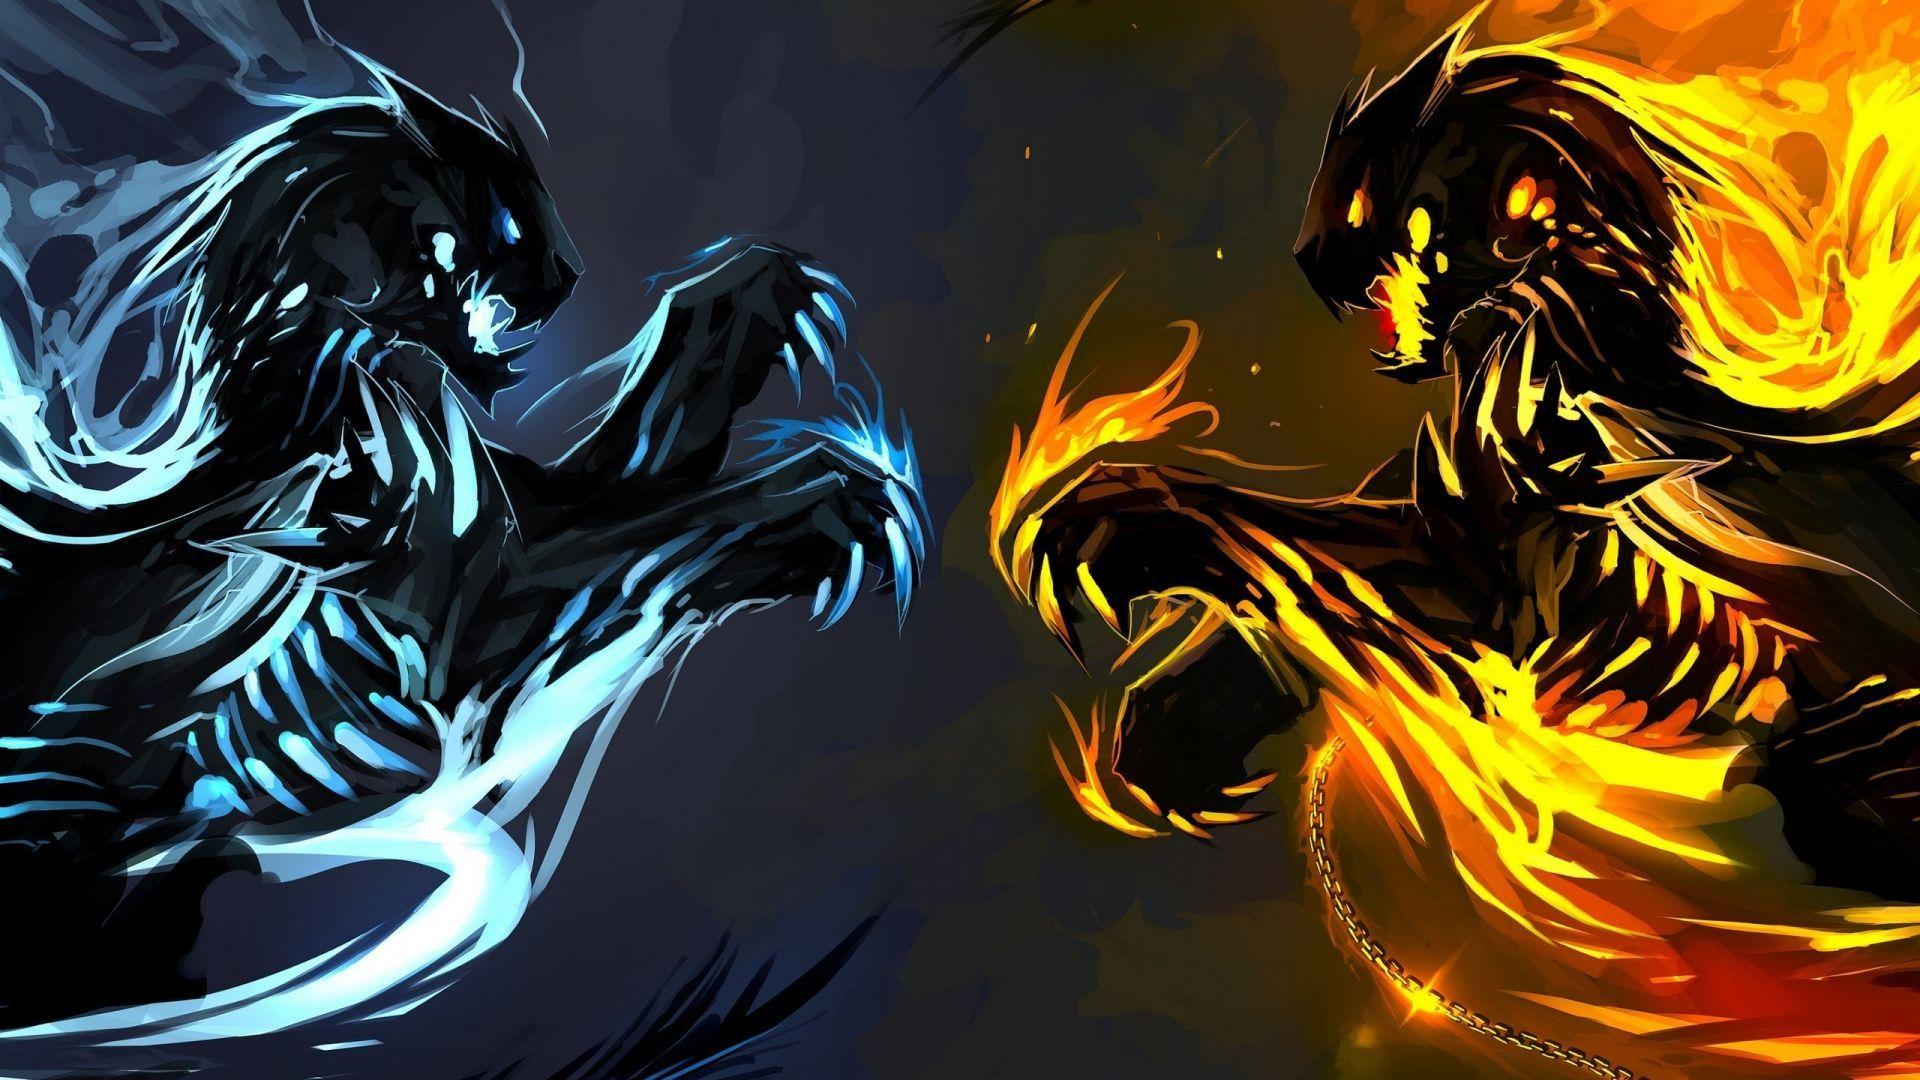 Ice and Fire Dragons wallpaper 2560x1440. Fire and ice